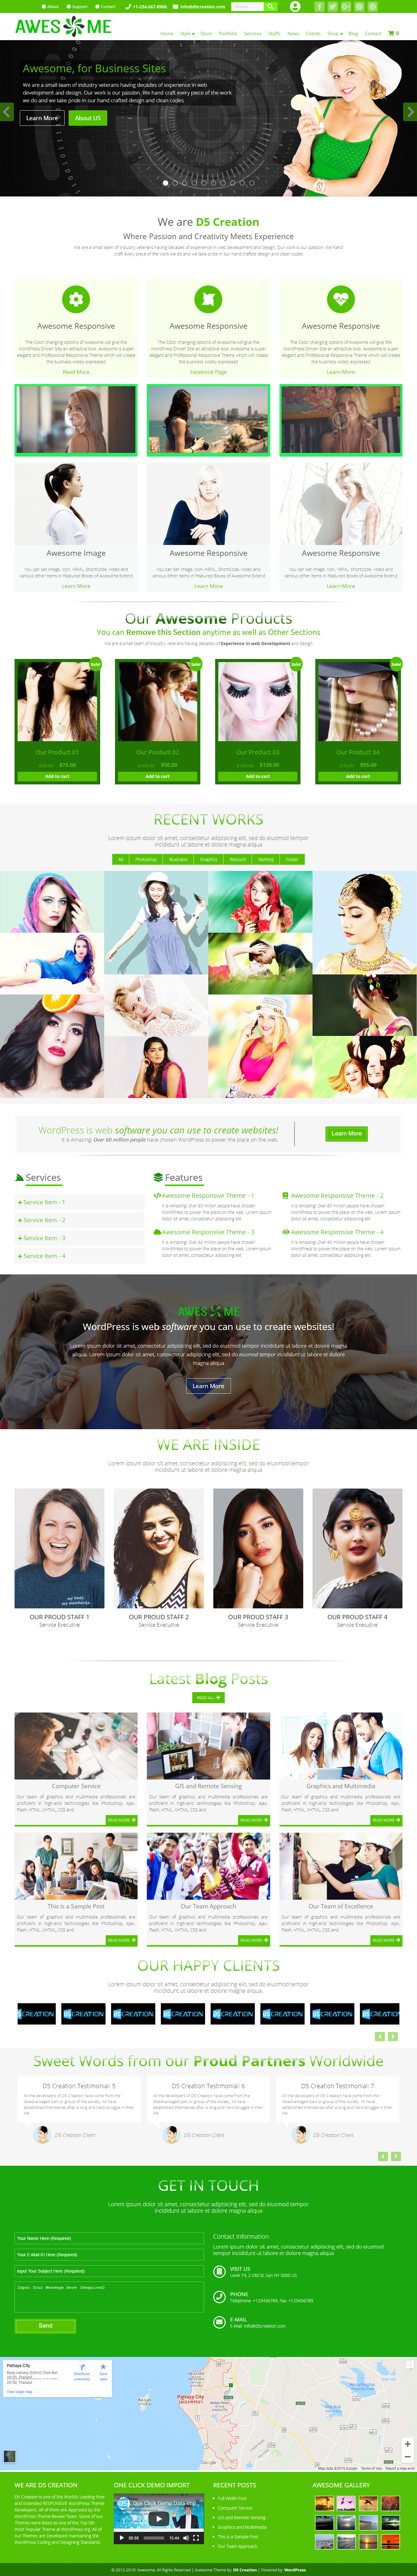 Awesome, best One Page WordPress Theme